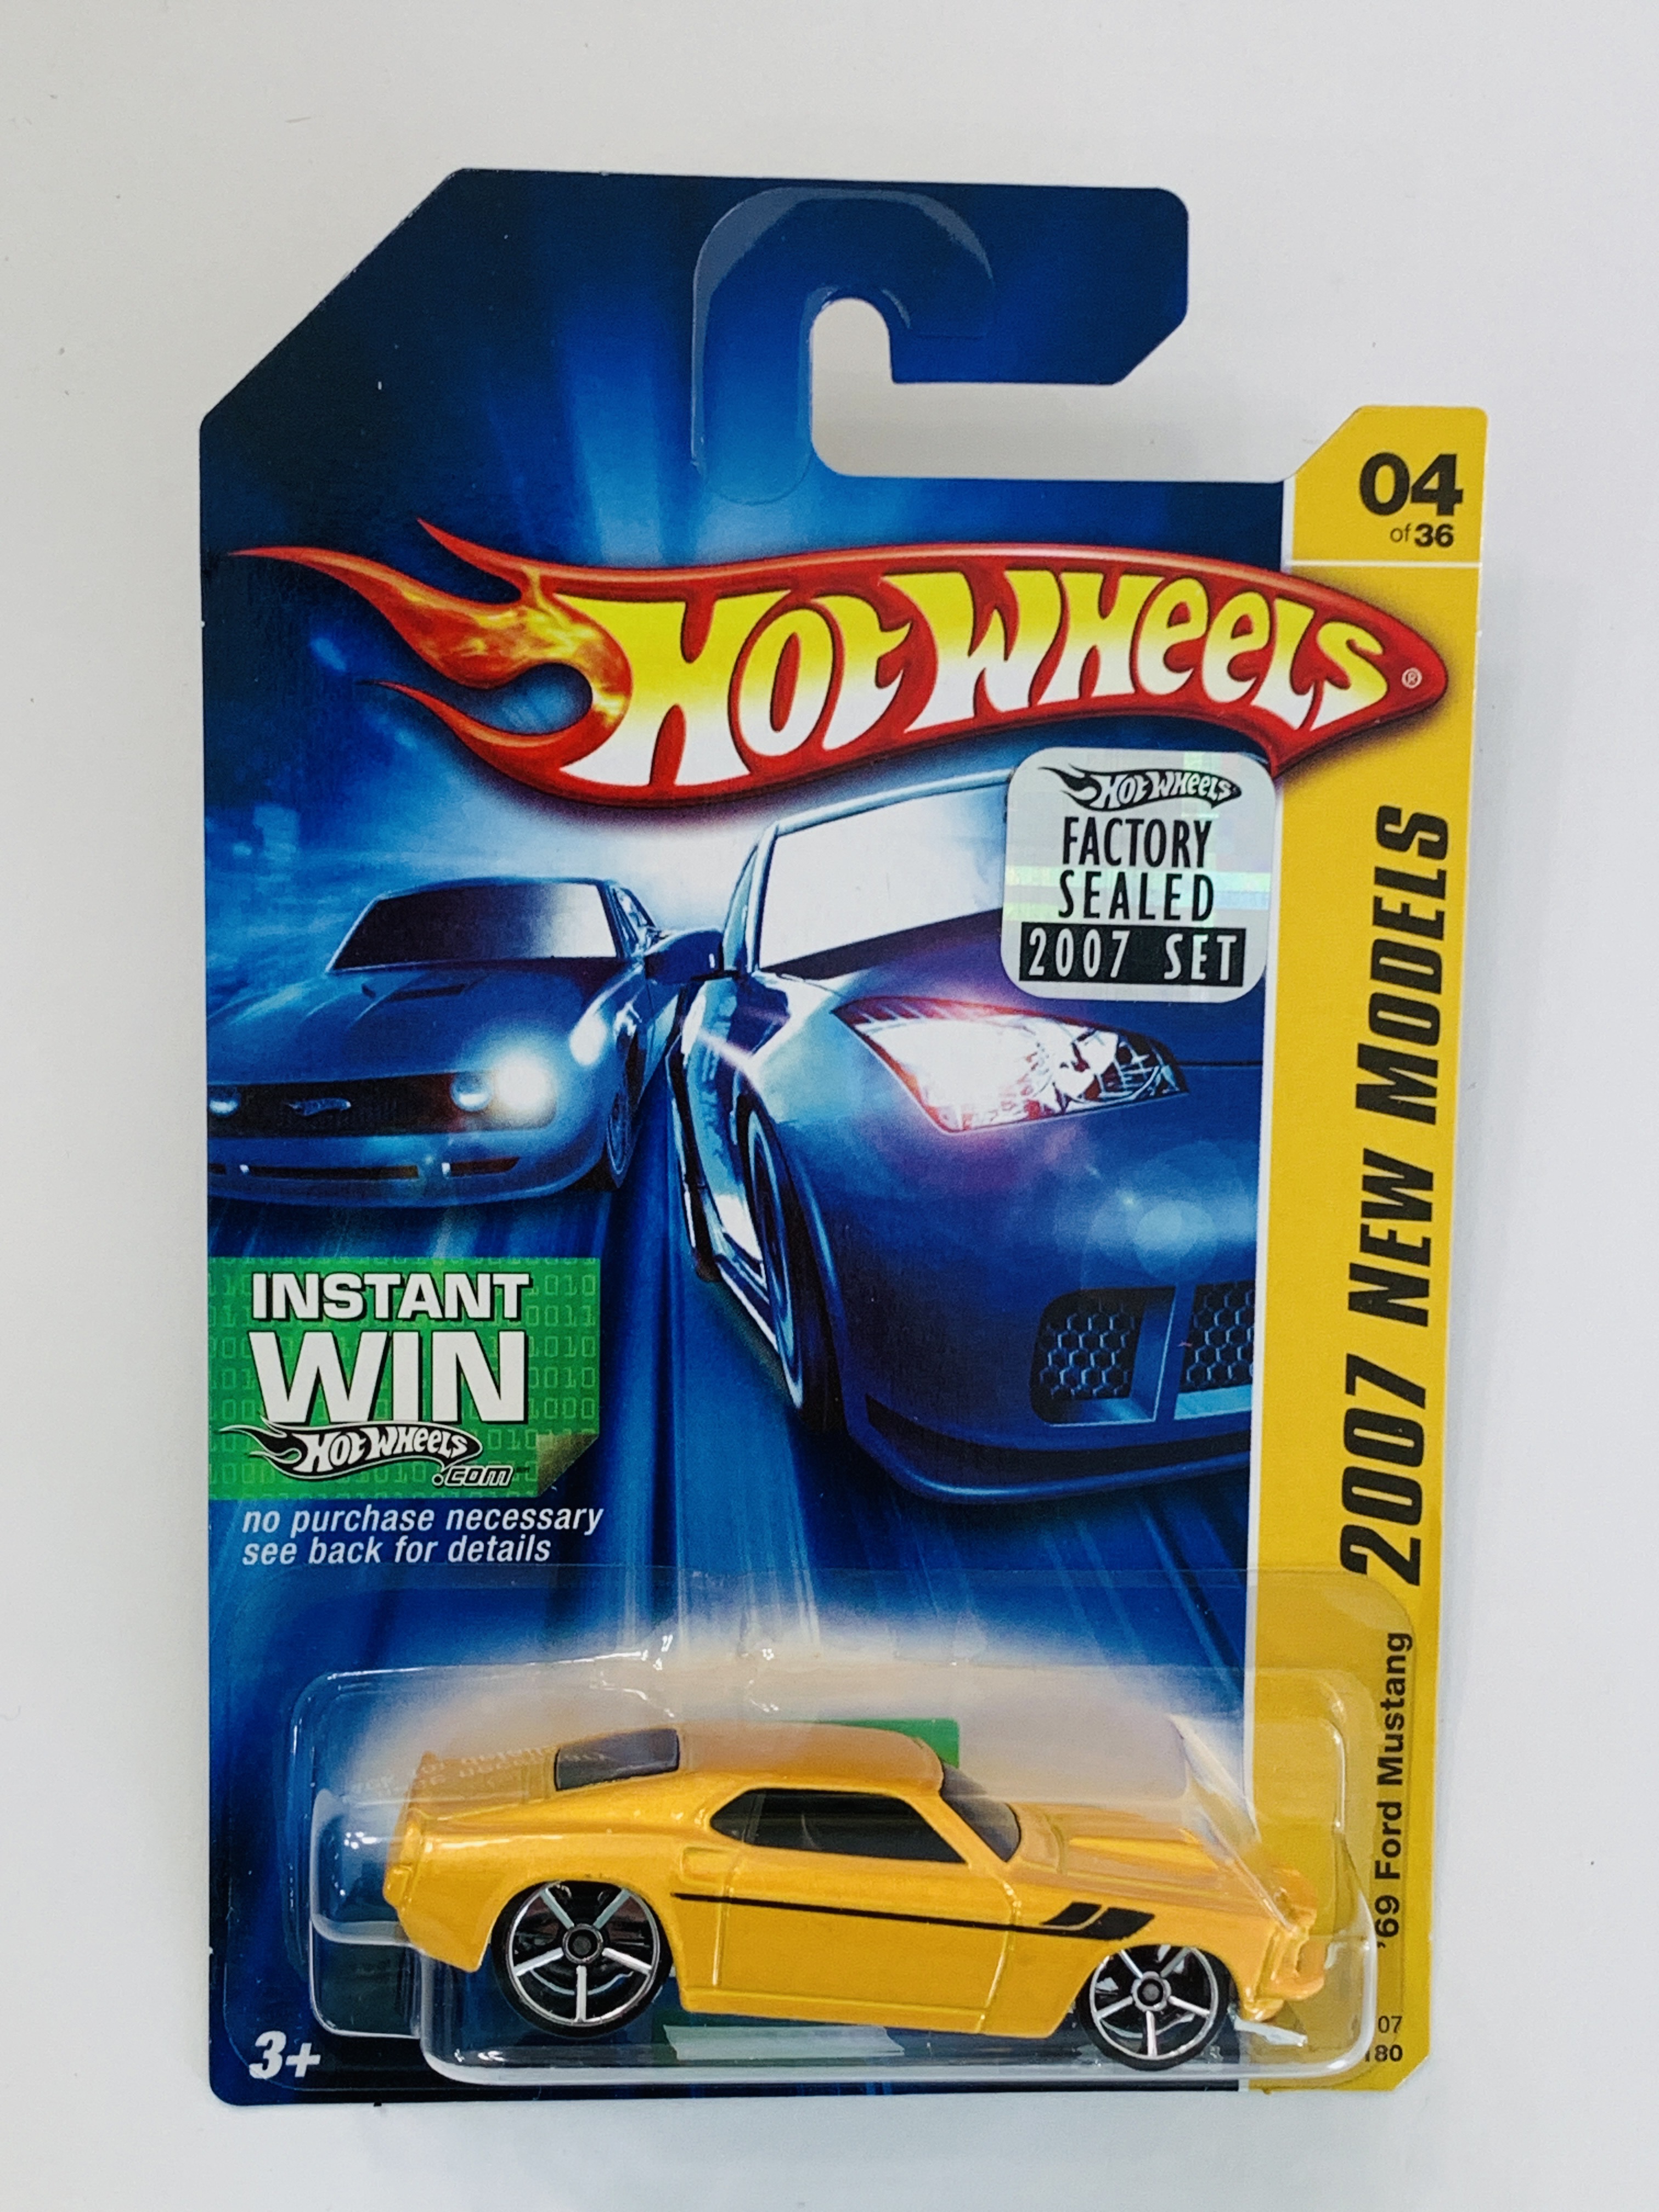 Hot Wheels 2007 Factory Set #004 '69 Ford Mustang - Yellow